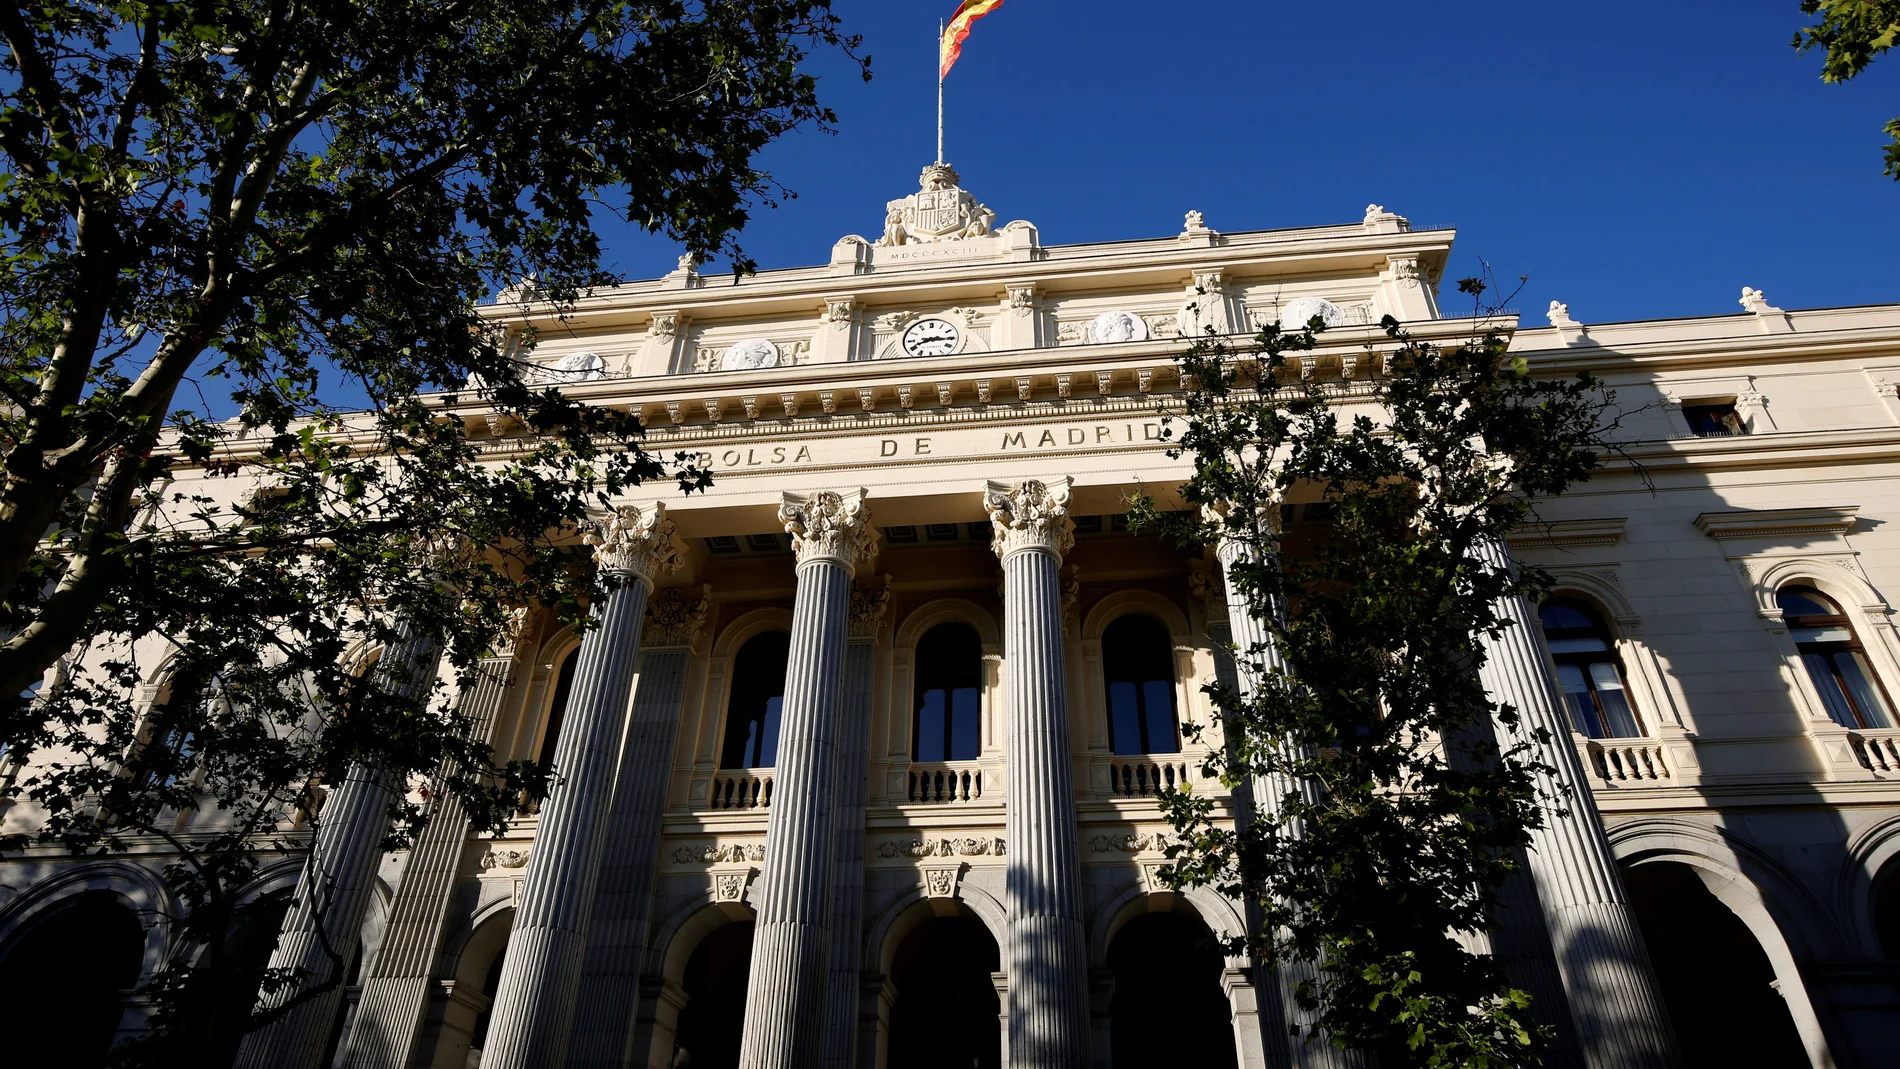 FILE PHOTO: A Spanish flag flutters above the Madrid Bourse